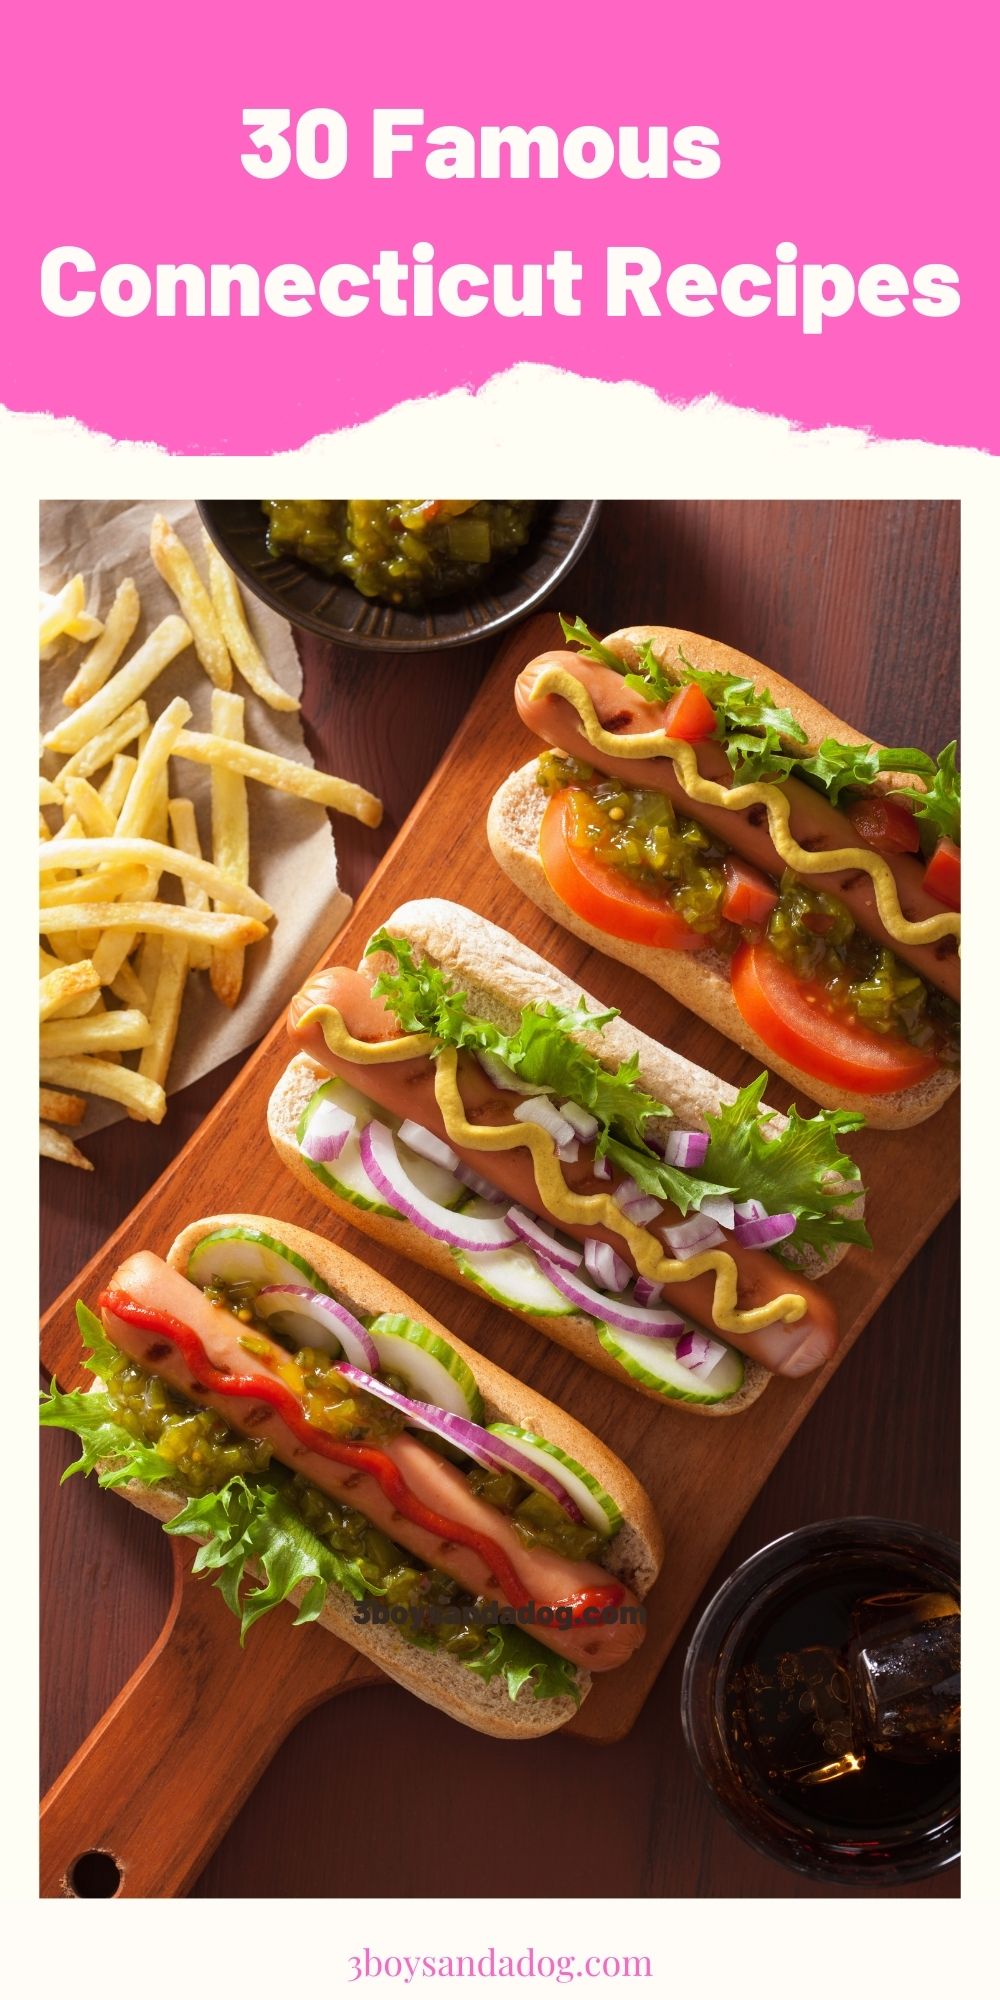 pin of hot dogs on a platter next to french fries with "30 Famous Connecticut Recipes"